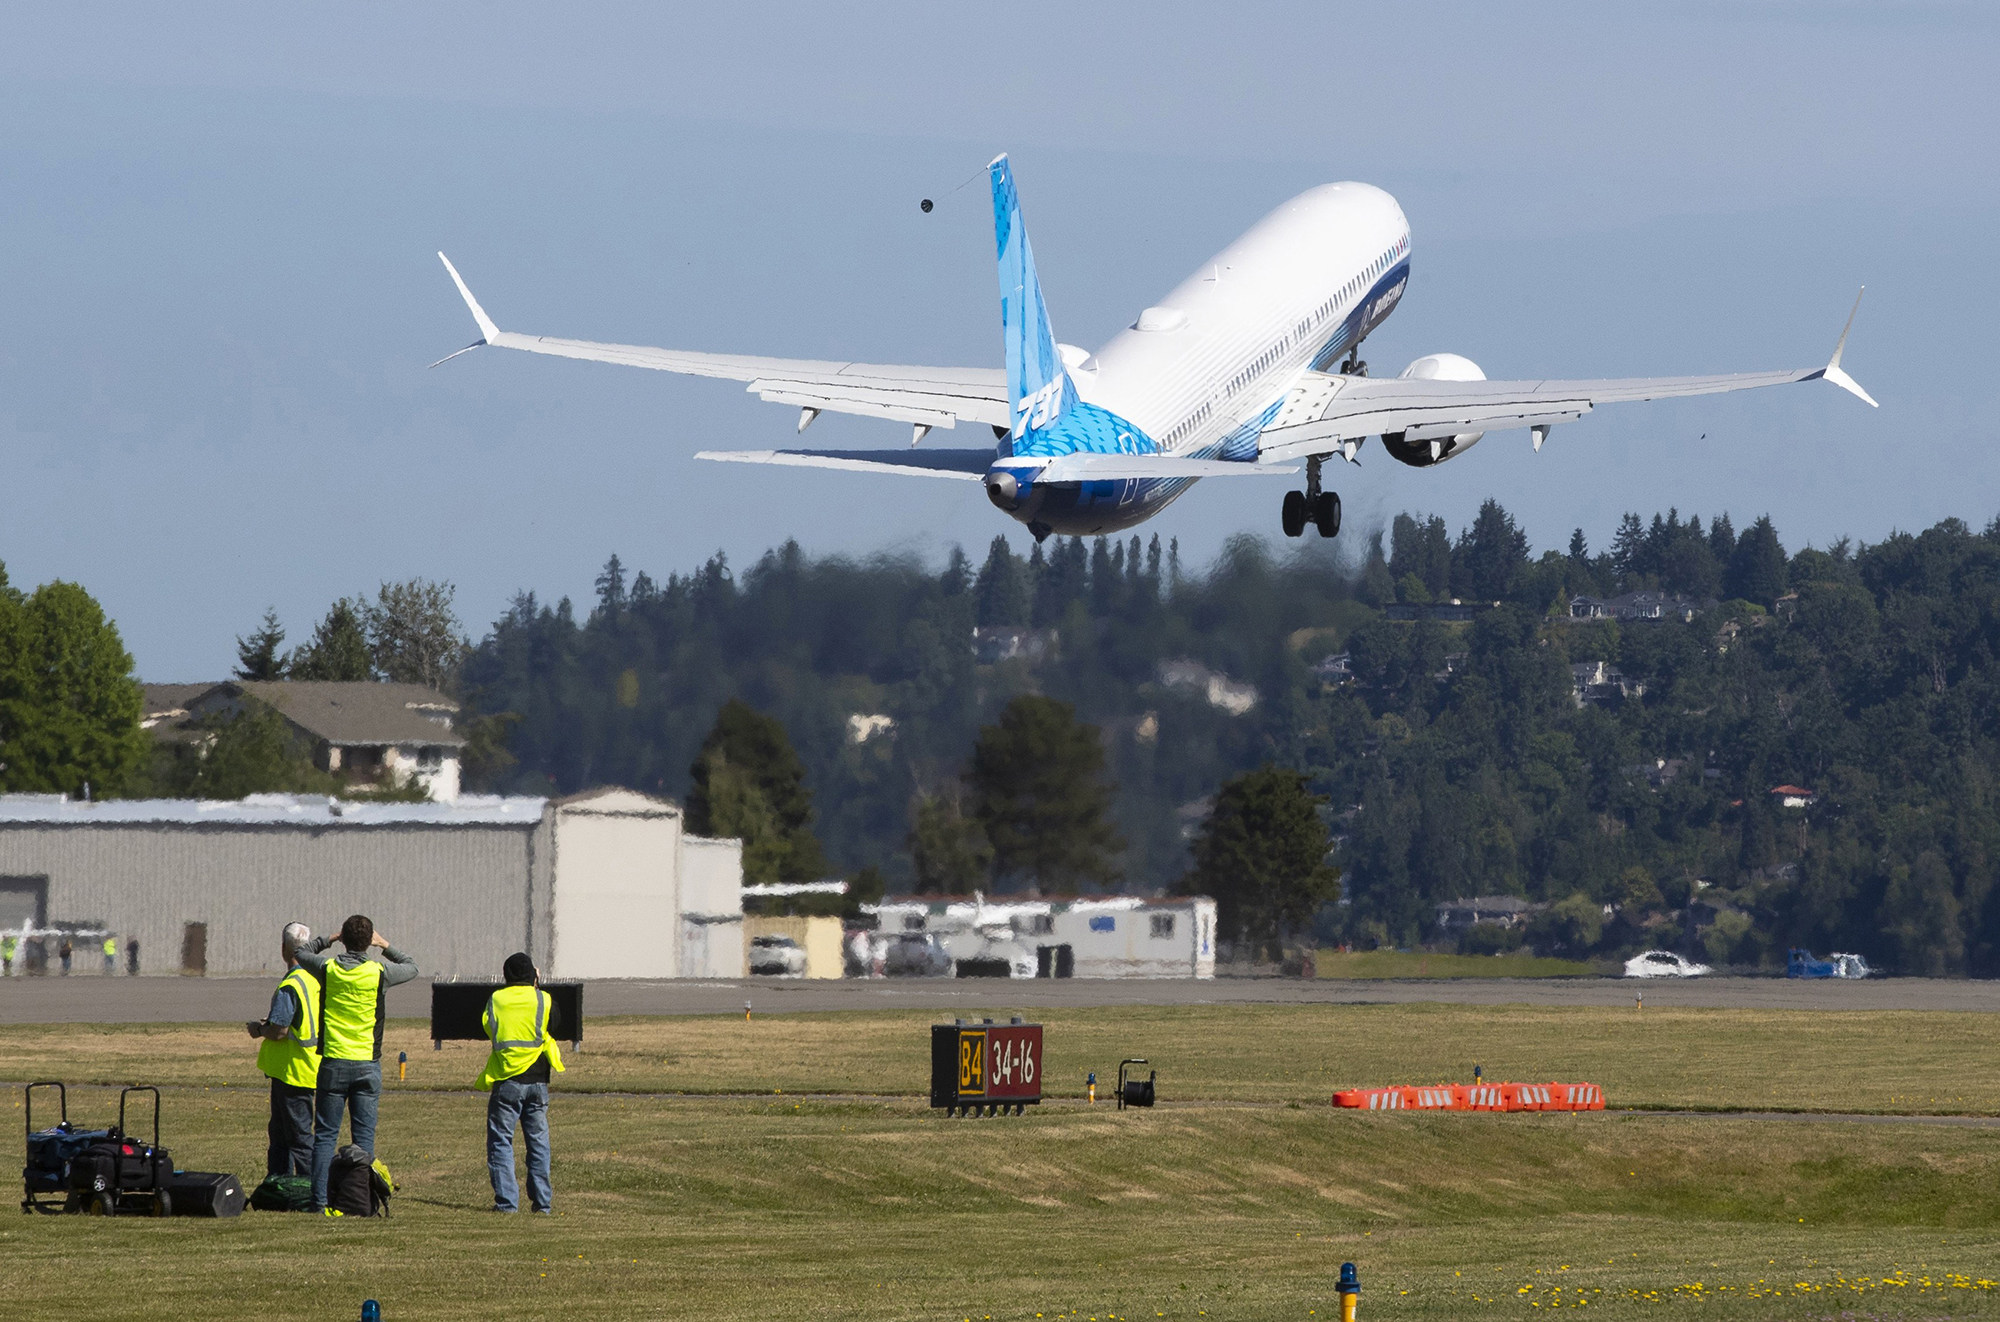 China’s aviation regulator in early December provided airlines with a list of fixes required before its return to commercial flying, which it predicted would occur by the beginning of this year. So far, however, there have been only test flights. Photo: The Seattle Times/TNS